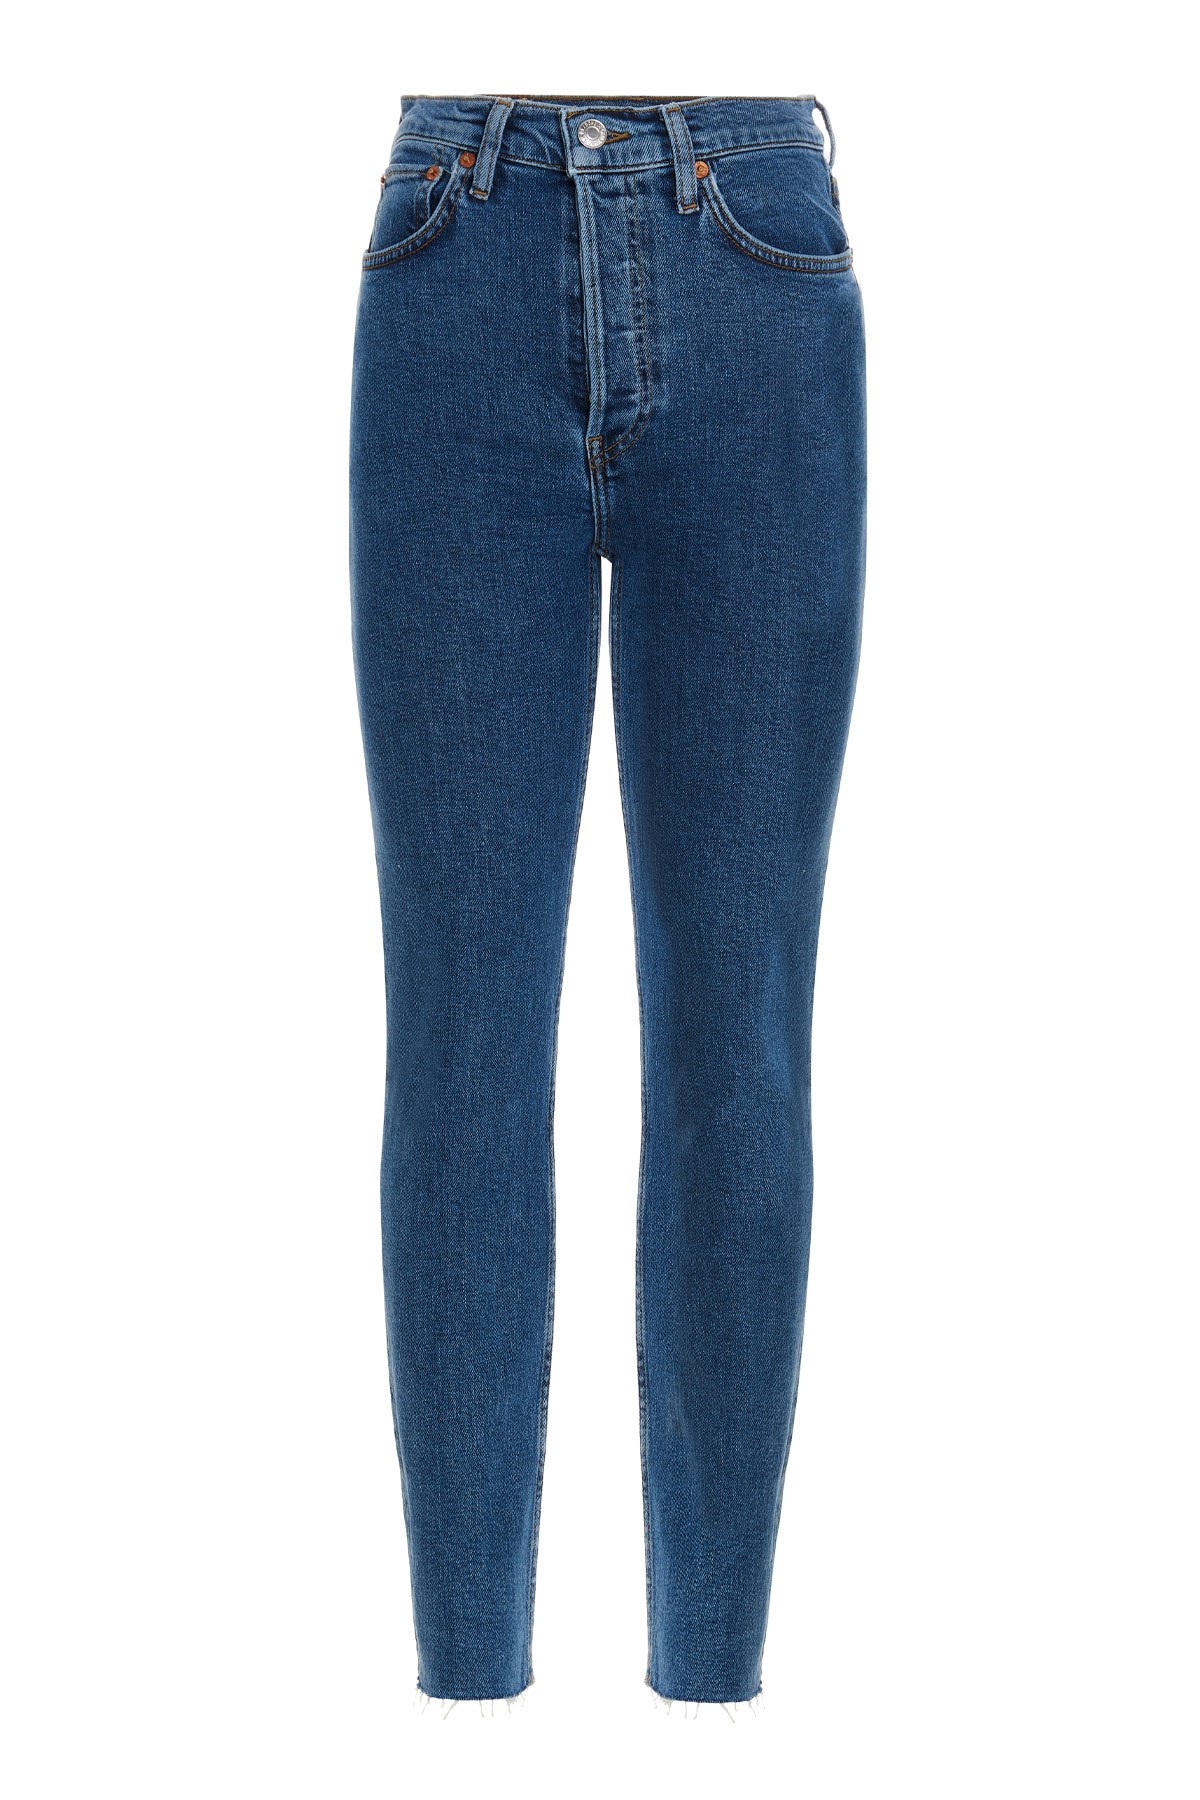 RE/DONE '90S High Rise Ankle Crop’ Jeans